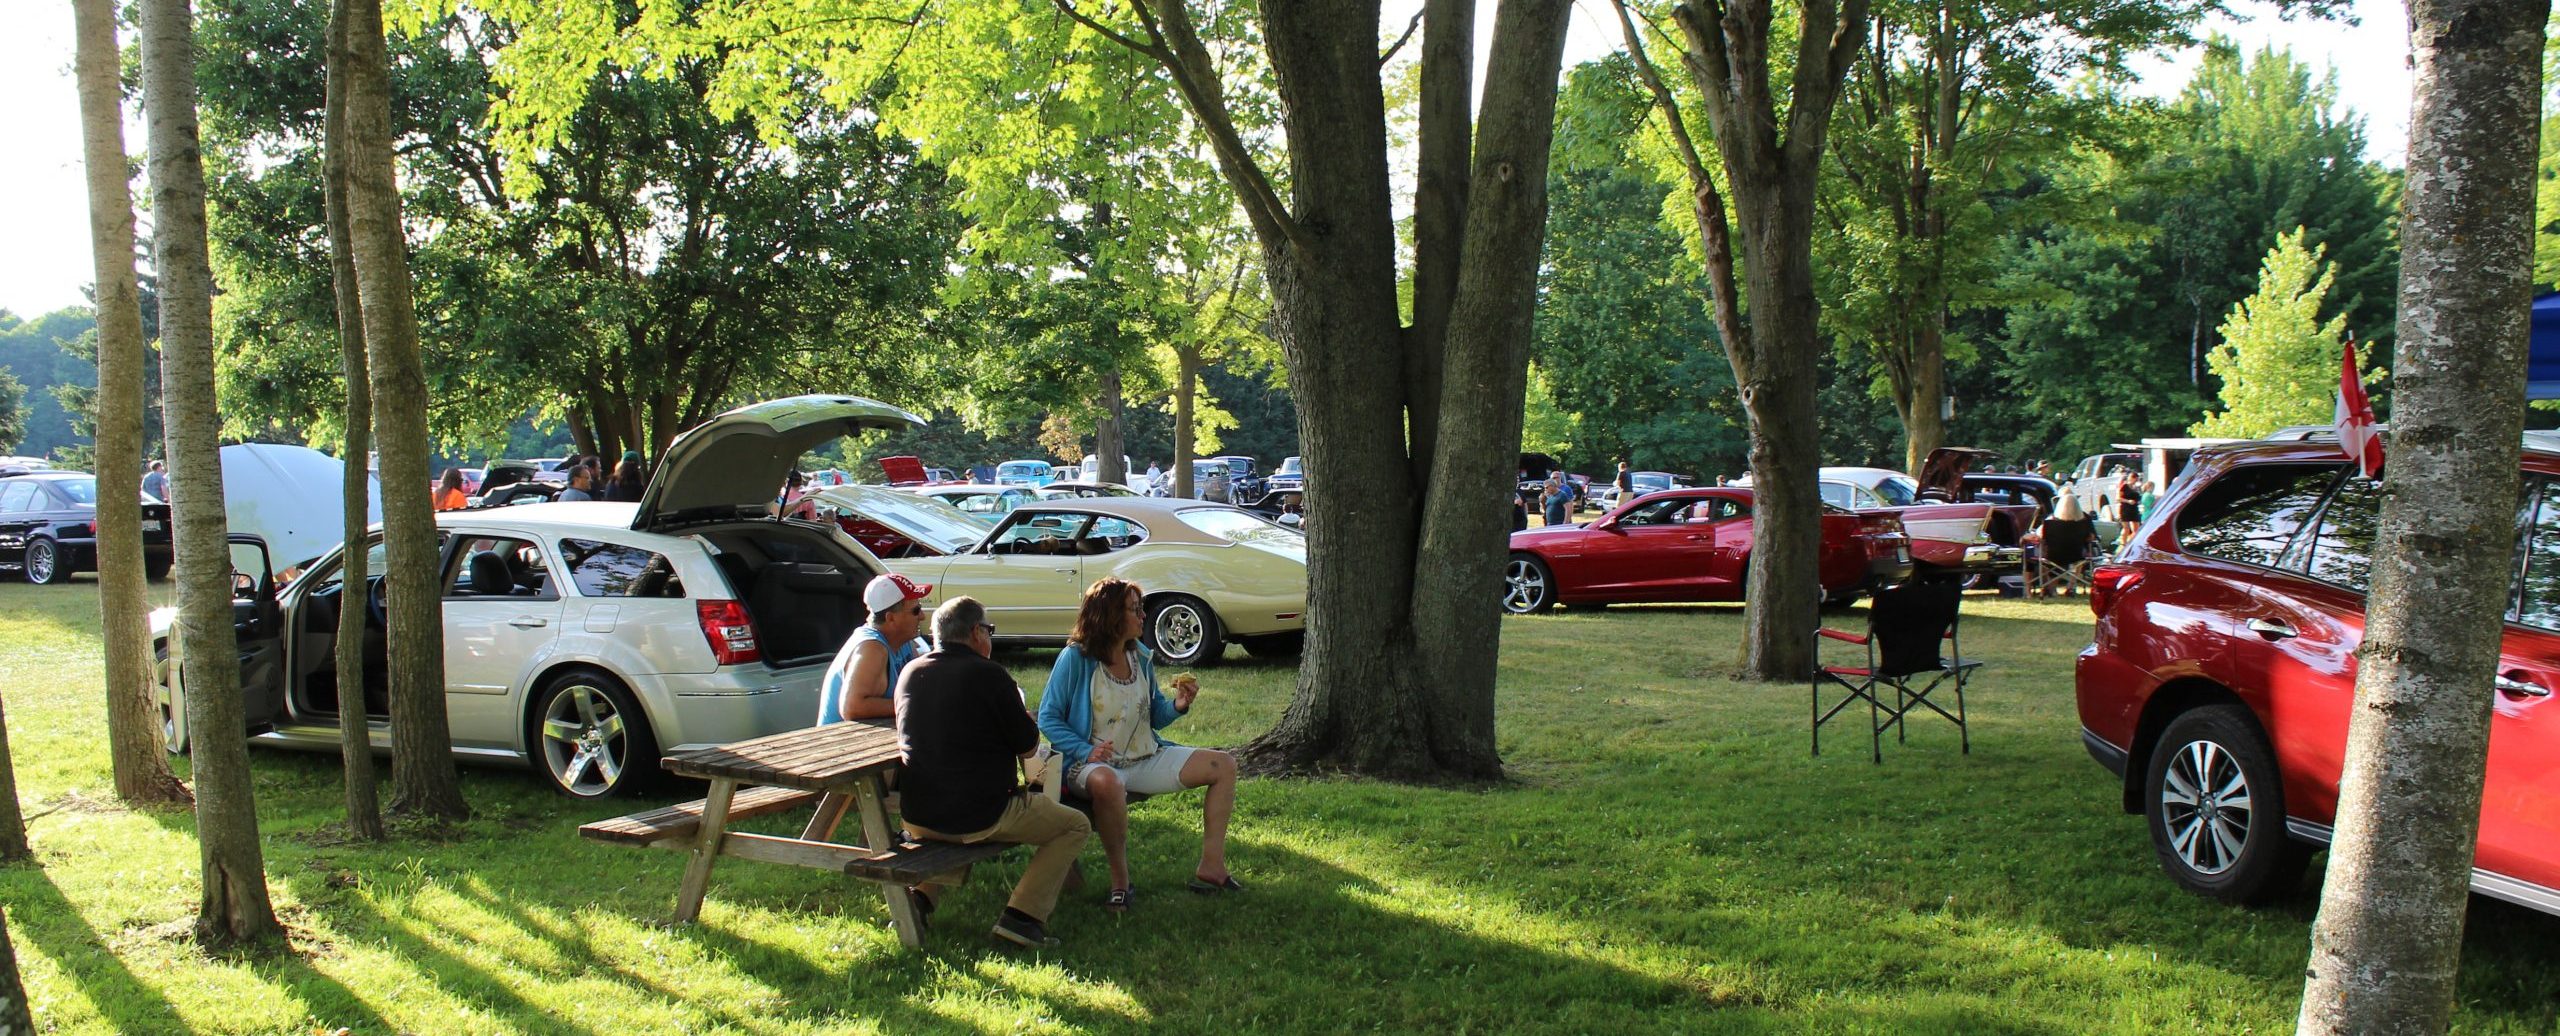 It Was a Spectacular Evening at Plunkett Estate for Our Country Cruizin – July 7, 2022